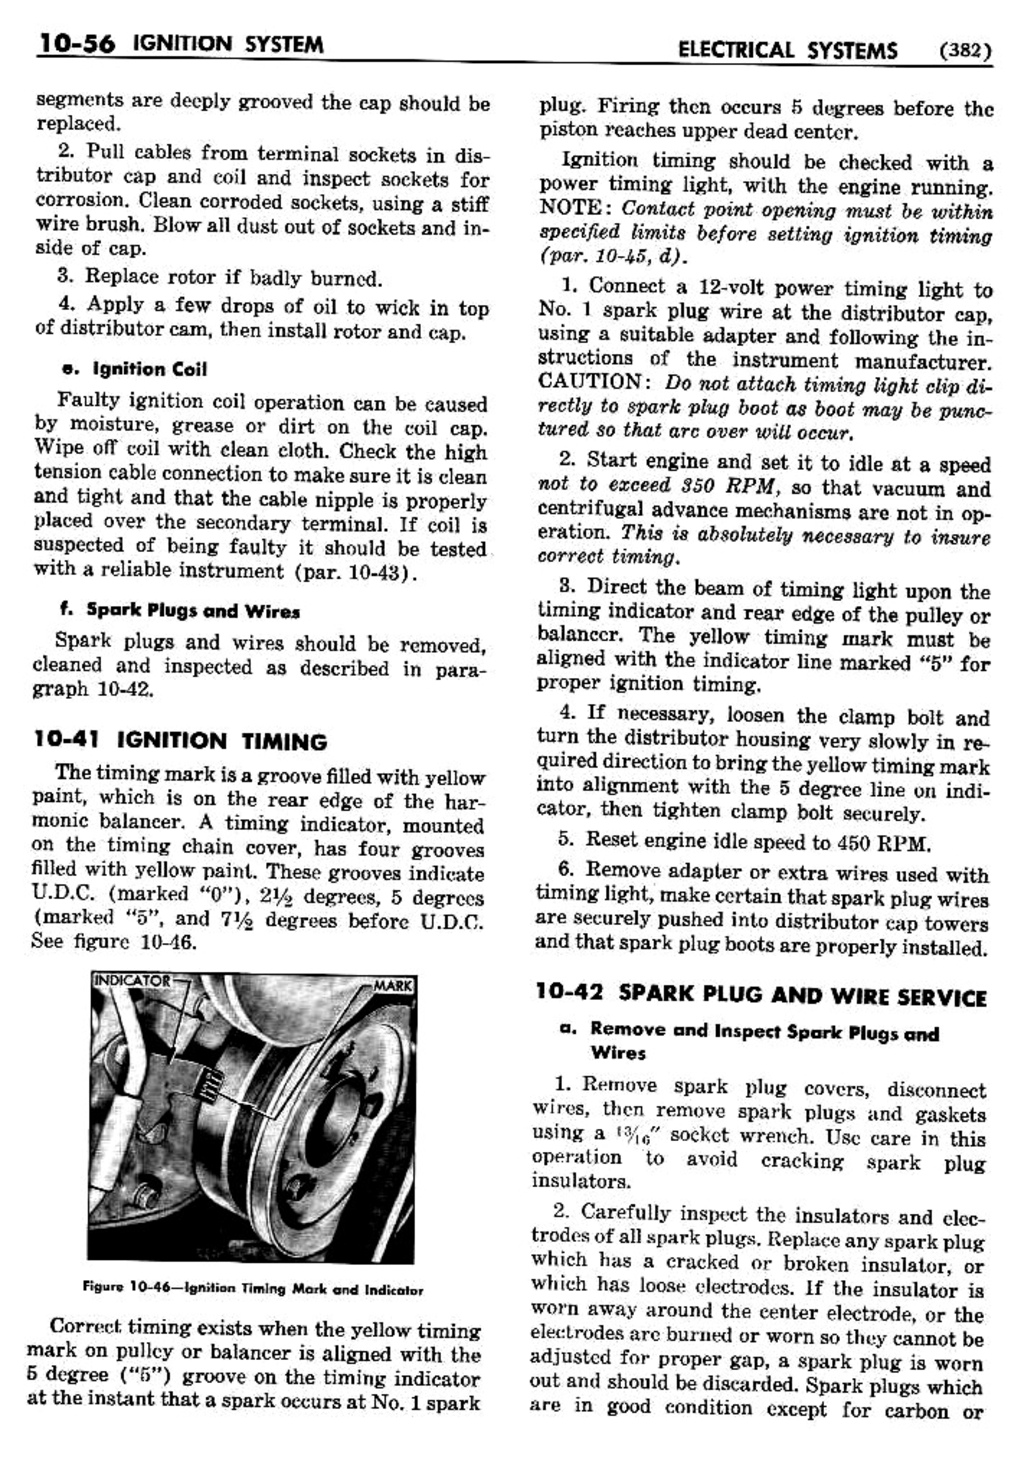 n_11 1956 Buick Shop Manual - Electrical Systems-056-056.jpg